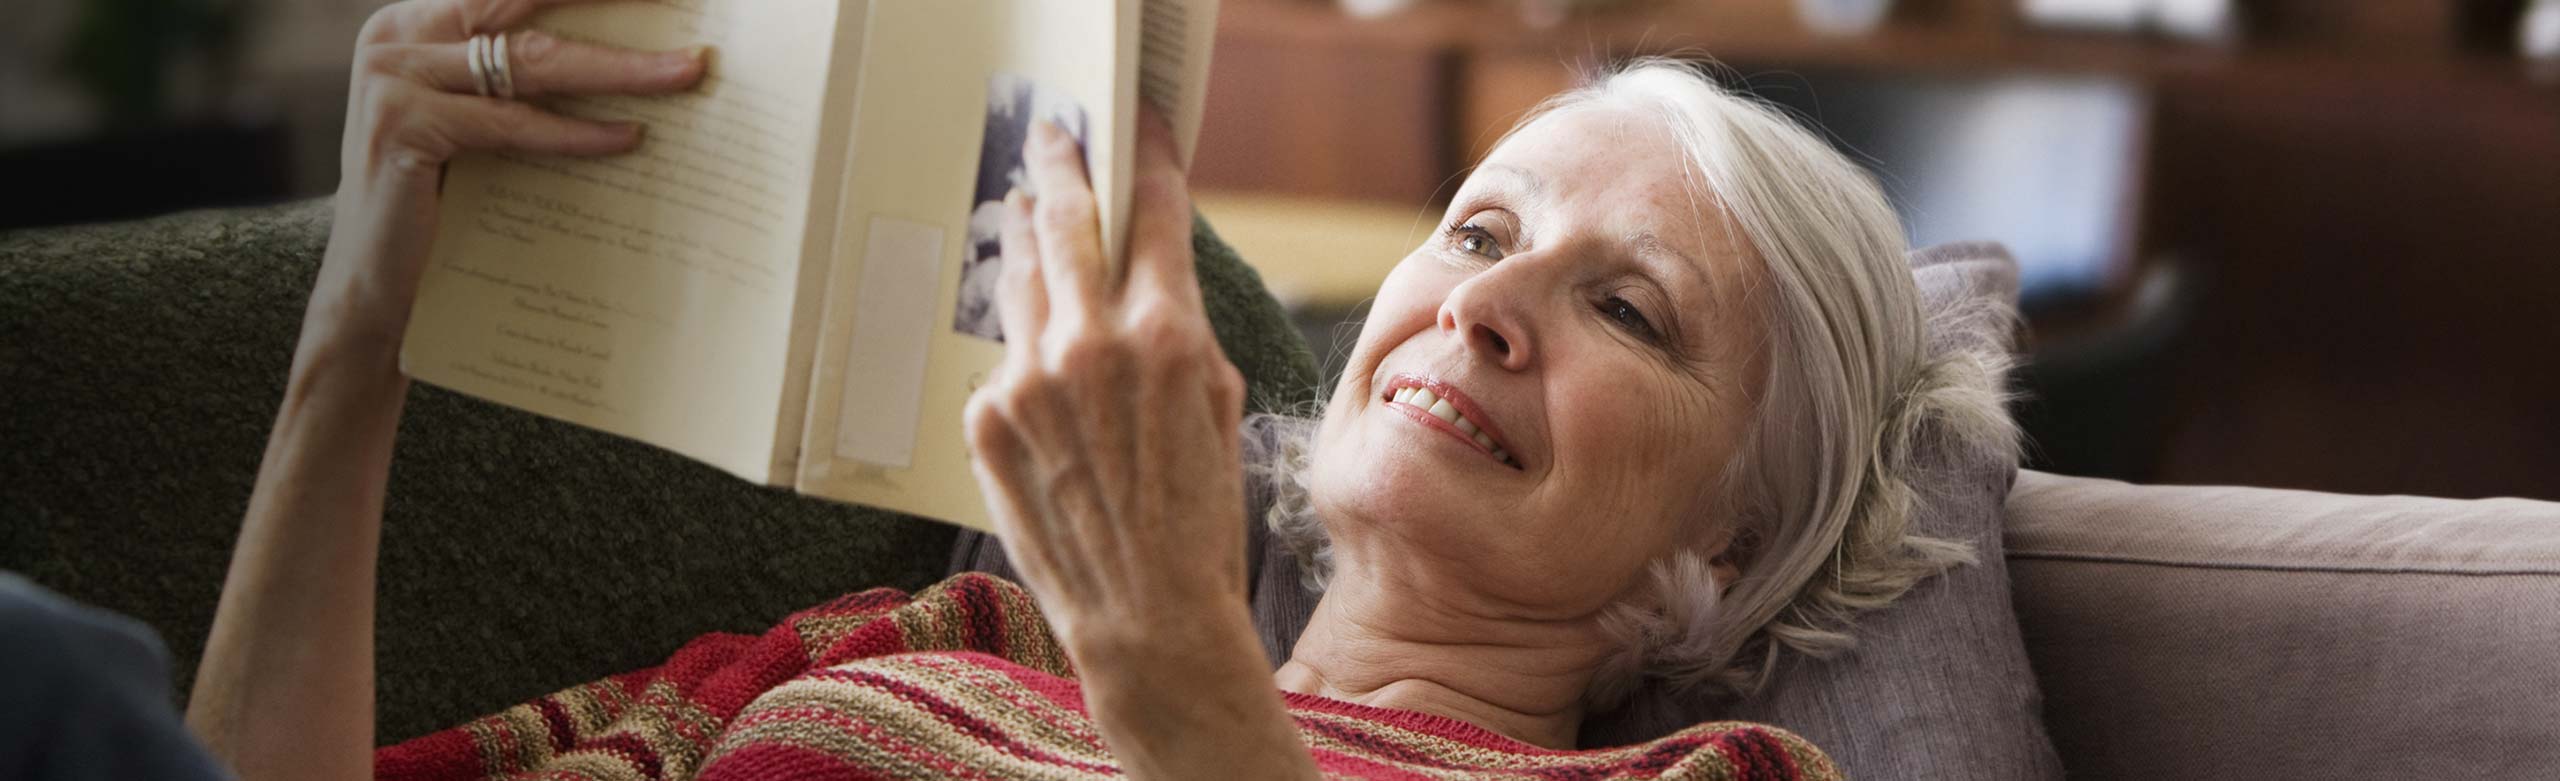 Woman laying on couch reading book